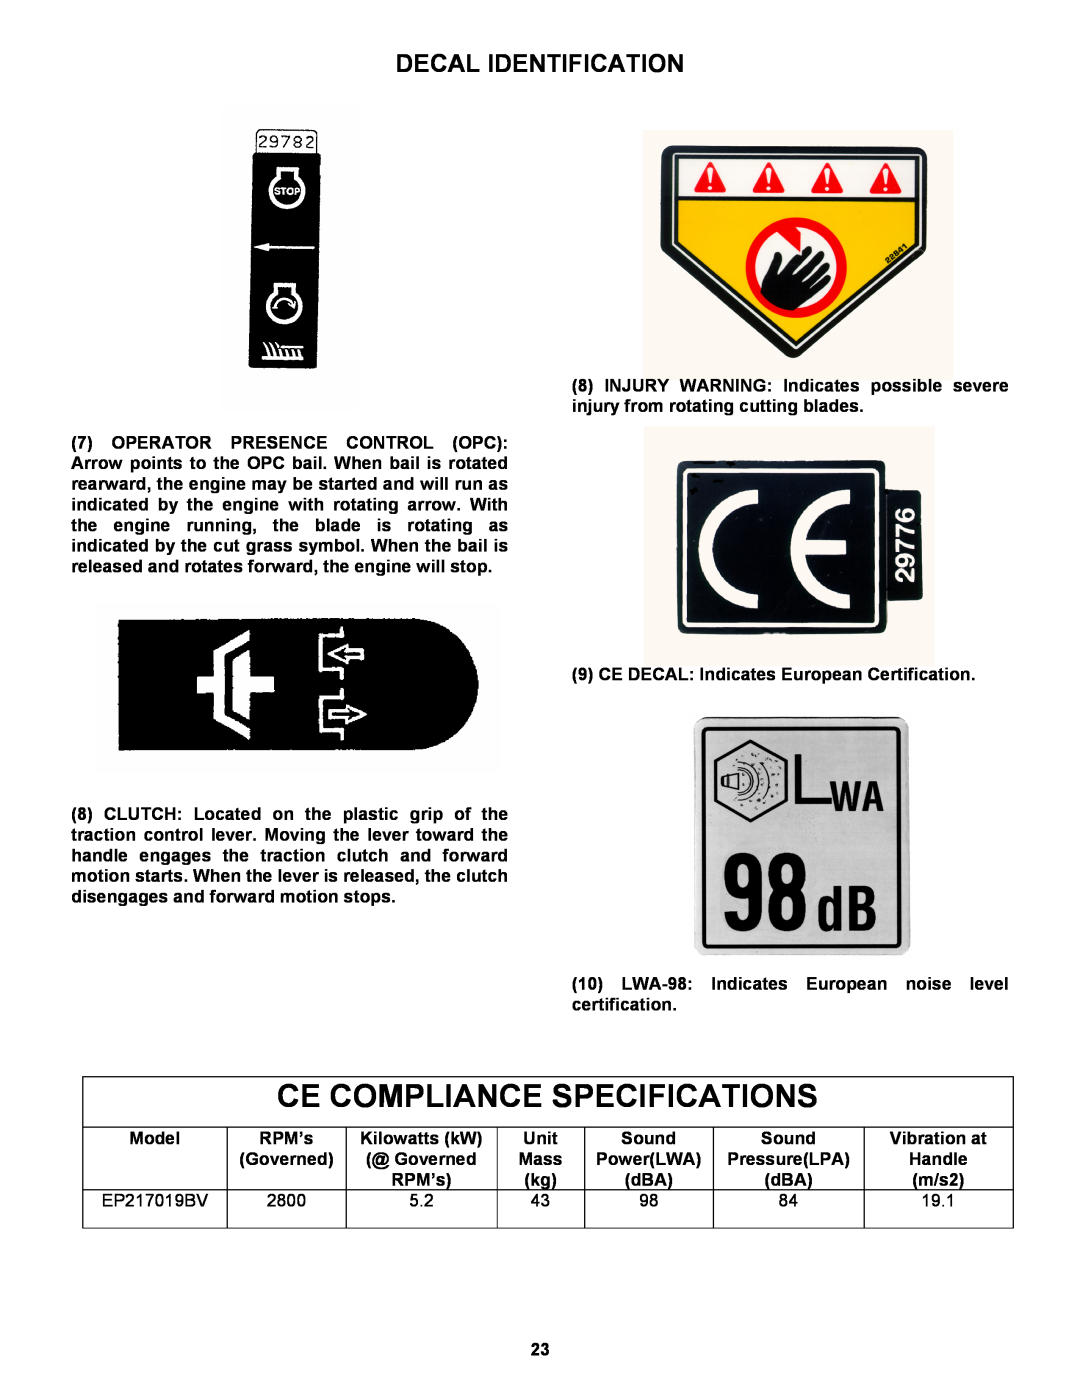 Snapper EP217019BV important safety instructions Ce Compliance Specifications, Decal Identification 